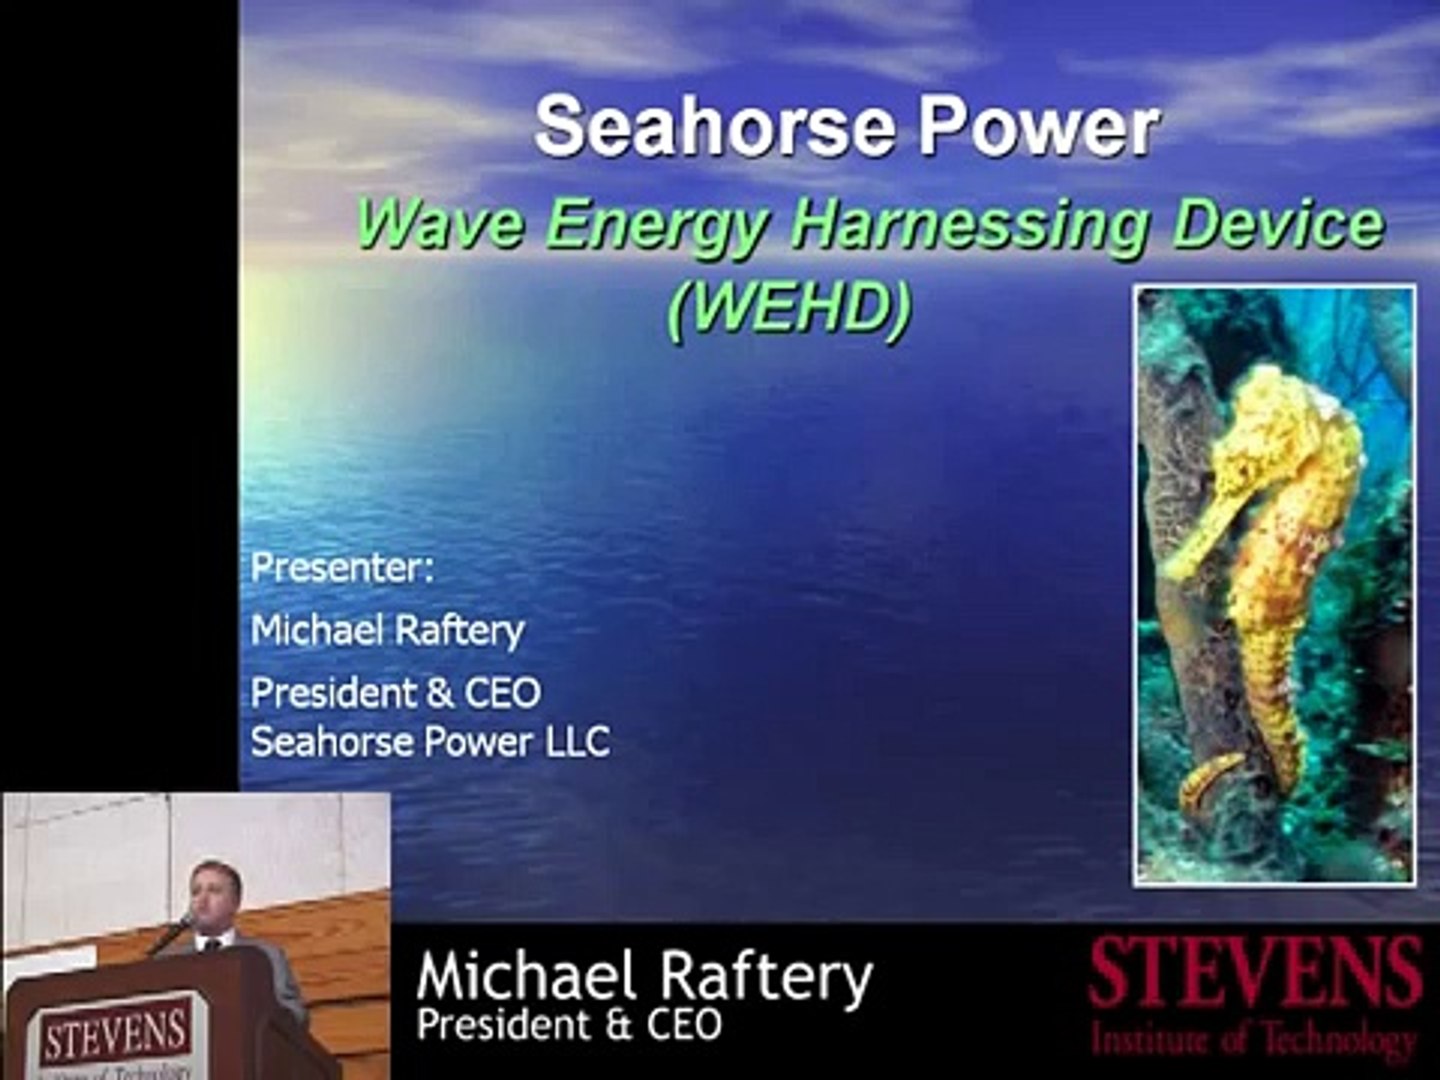 Mr. Michael Raftery: Seahorse Power